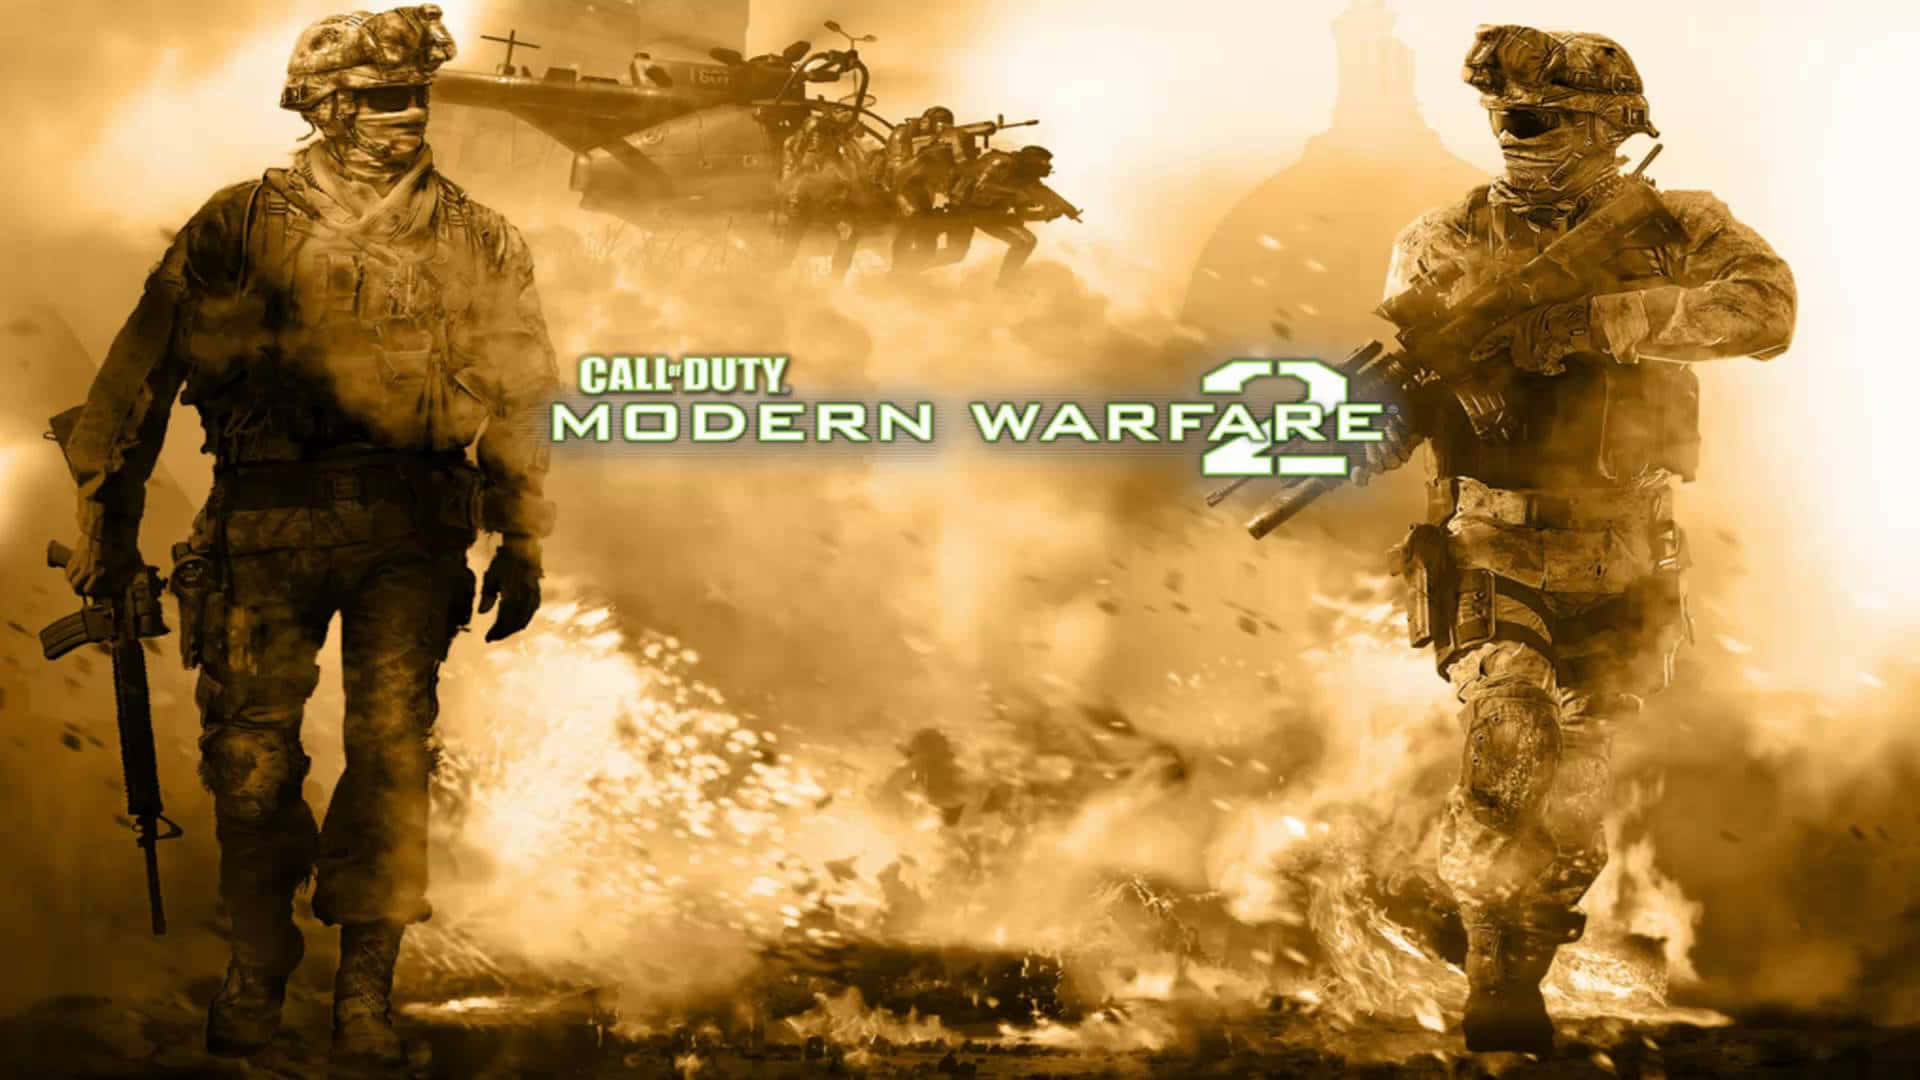 Sharpen Your Combat Tactics with Call of Duty Modern Warfare